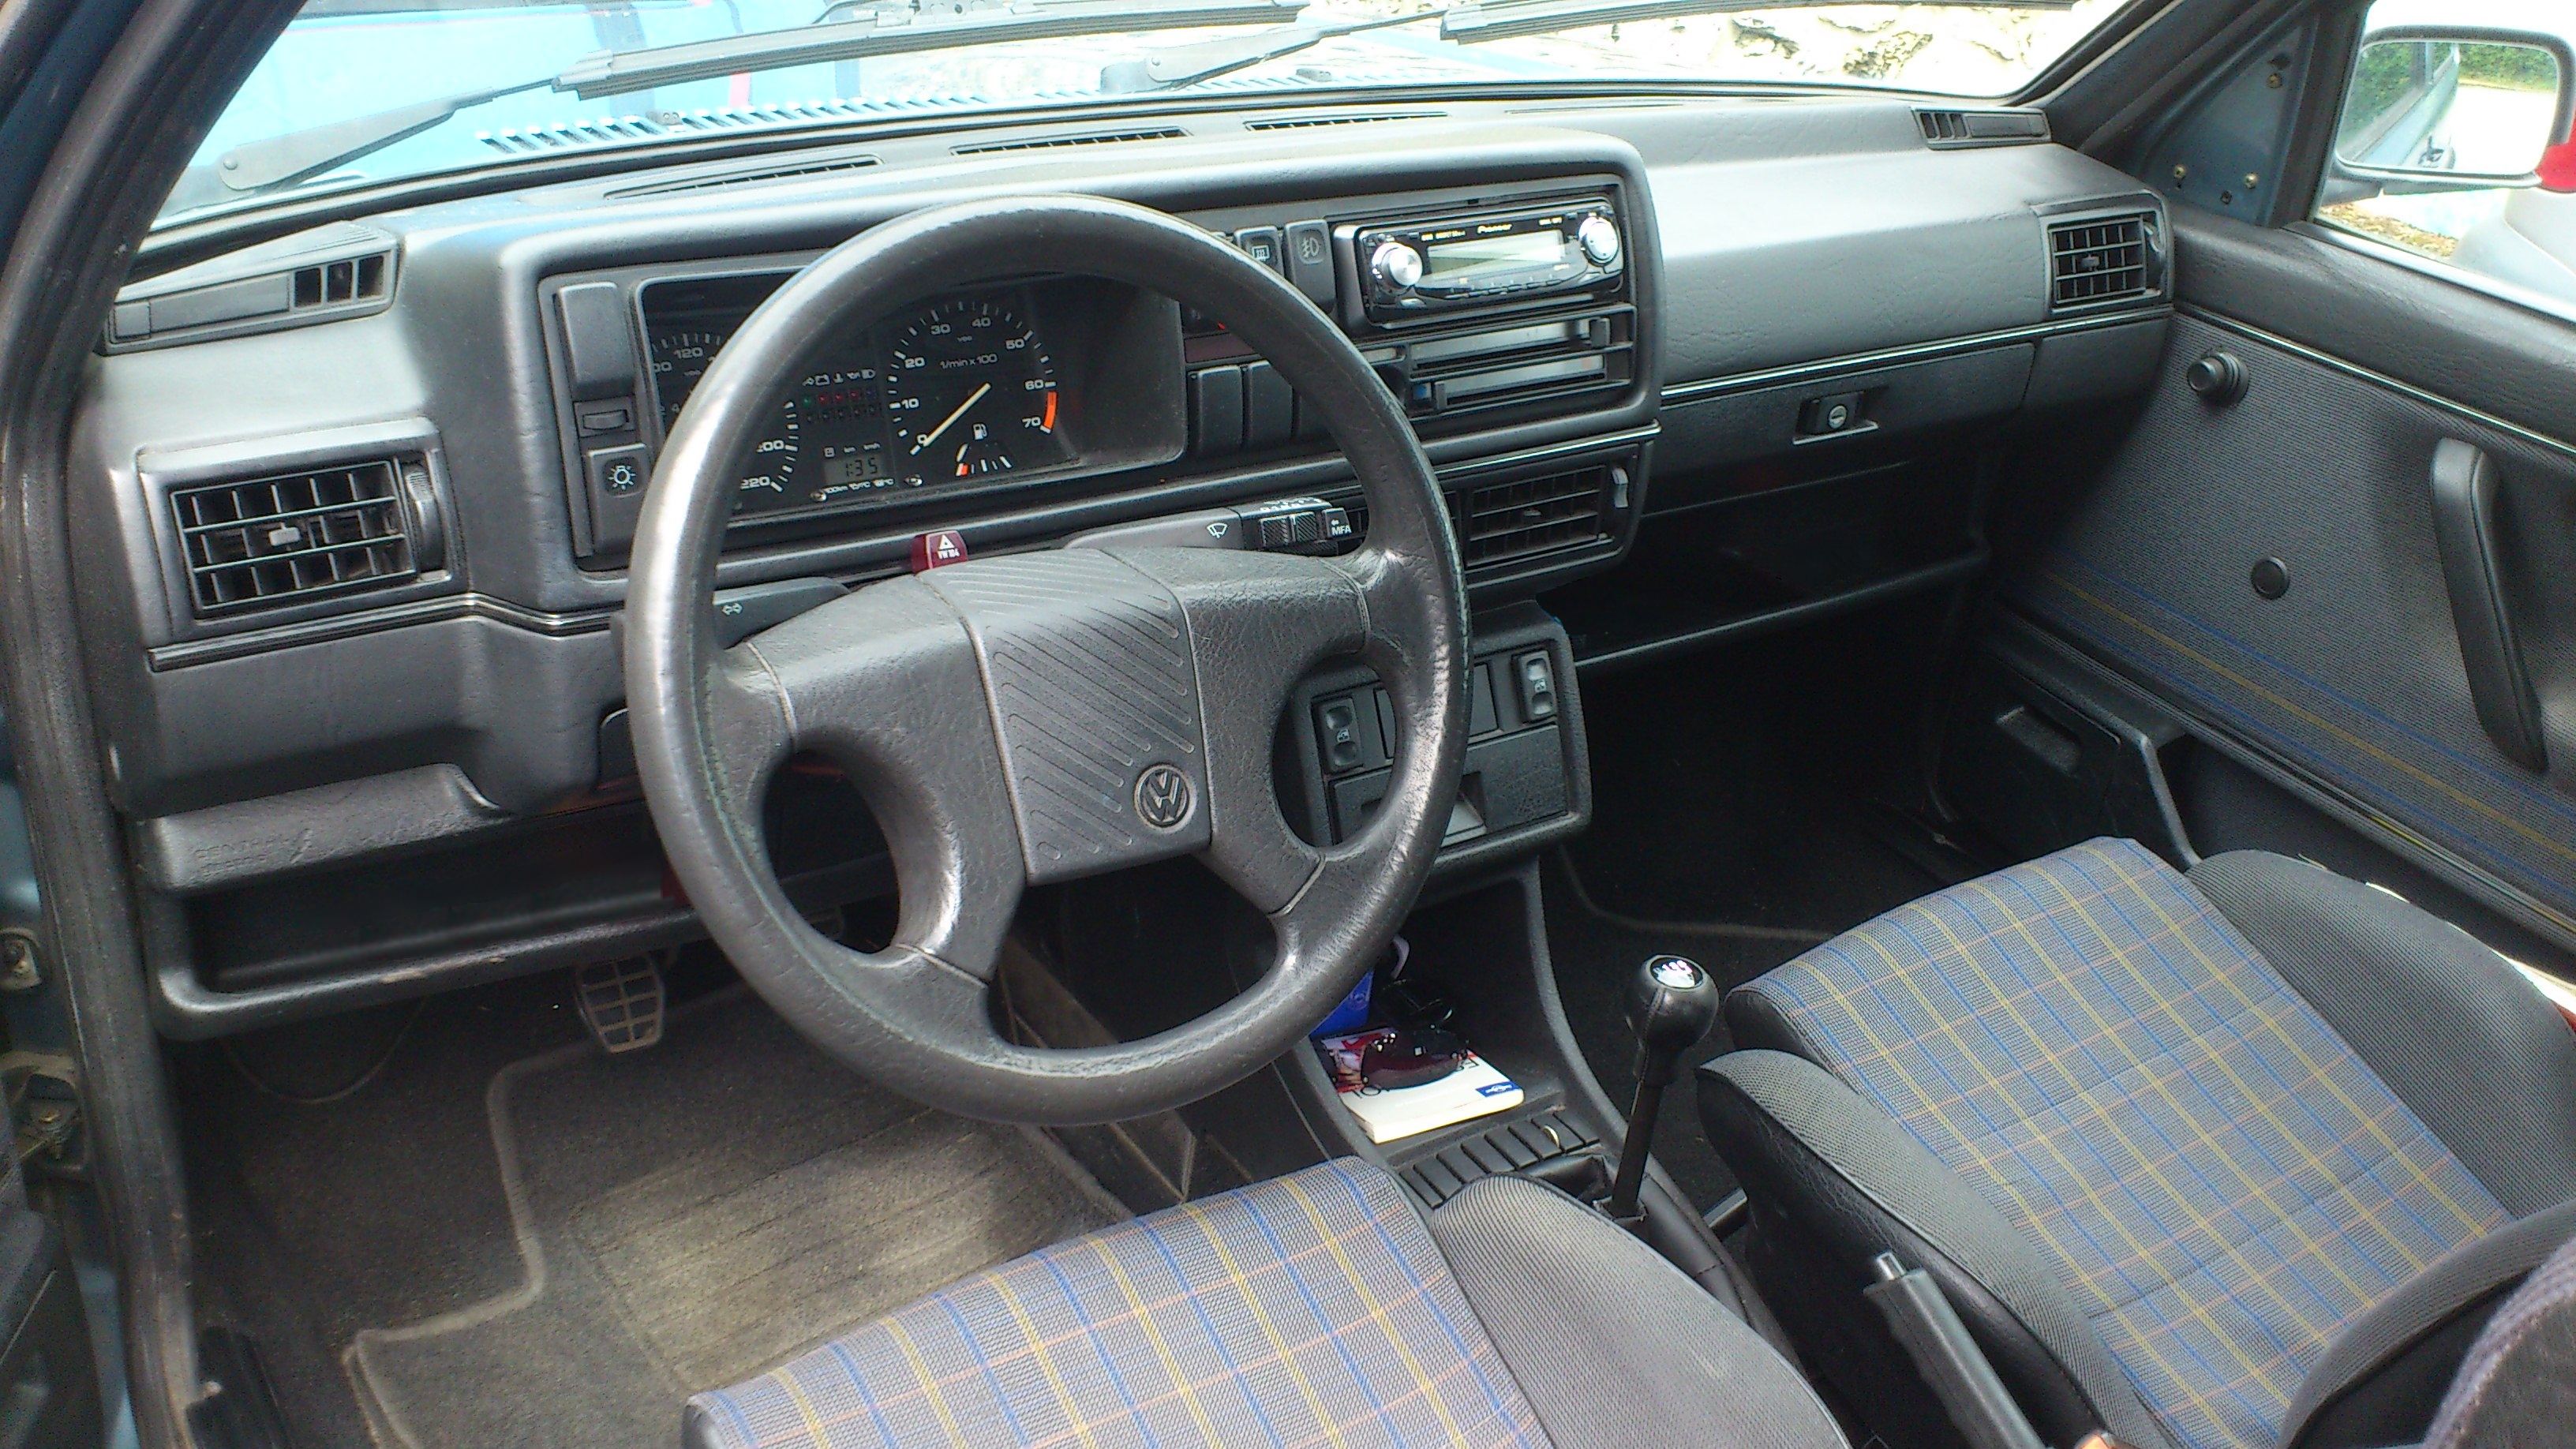 The Old School Review The Mk2 Volkswagen Golf Gti 8v Justdrive There